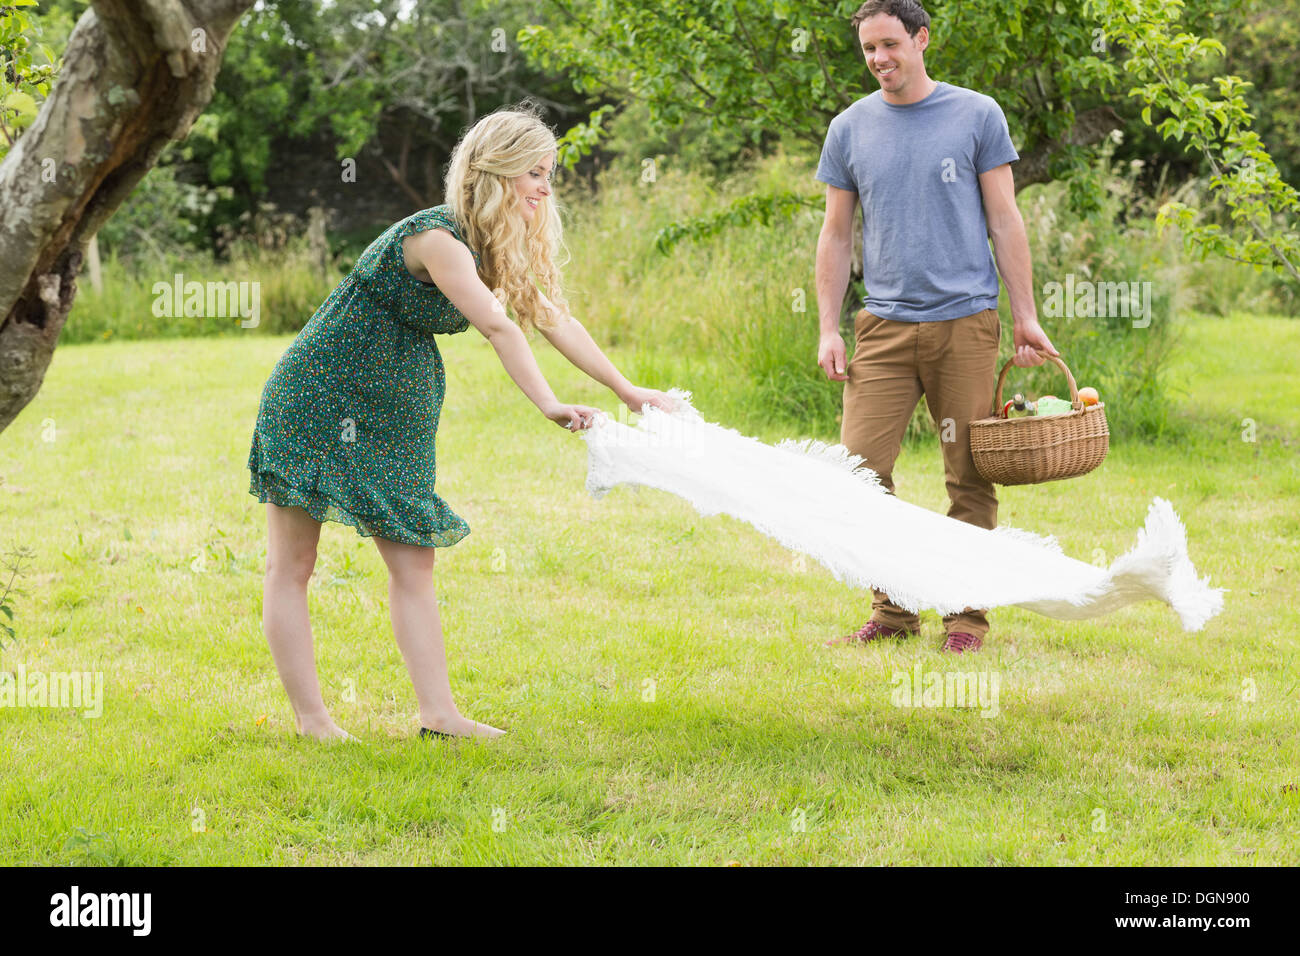 Blonde woman spreading a blanket for a picnic with her boyfriend Stock Photo